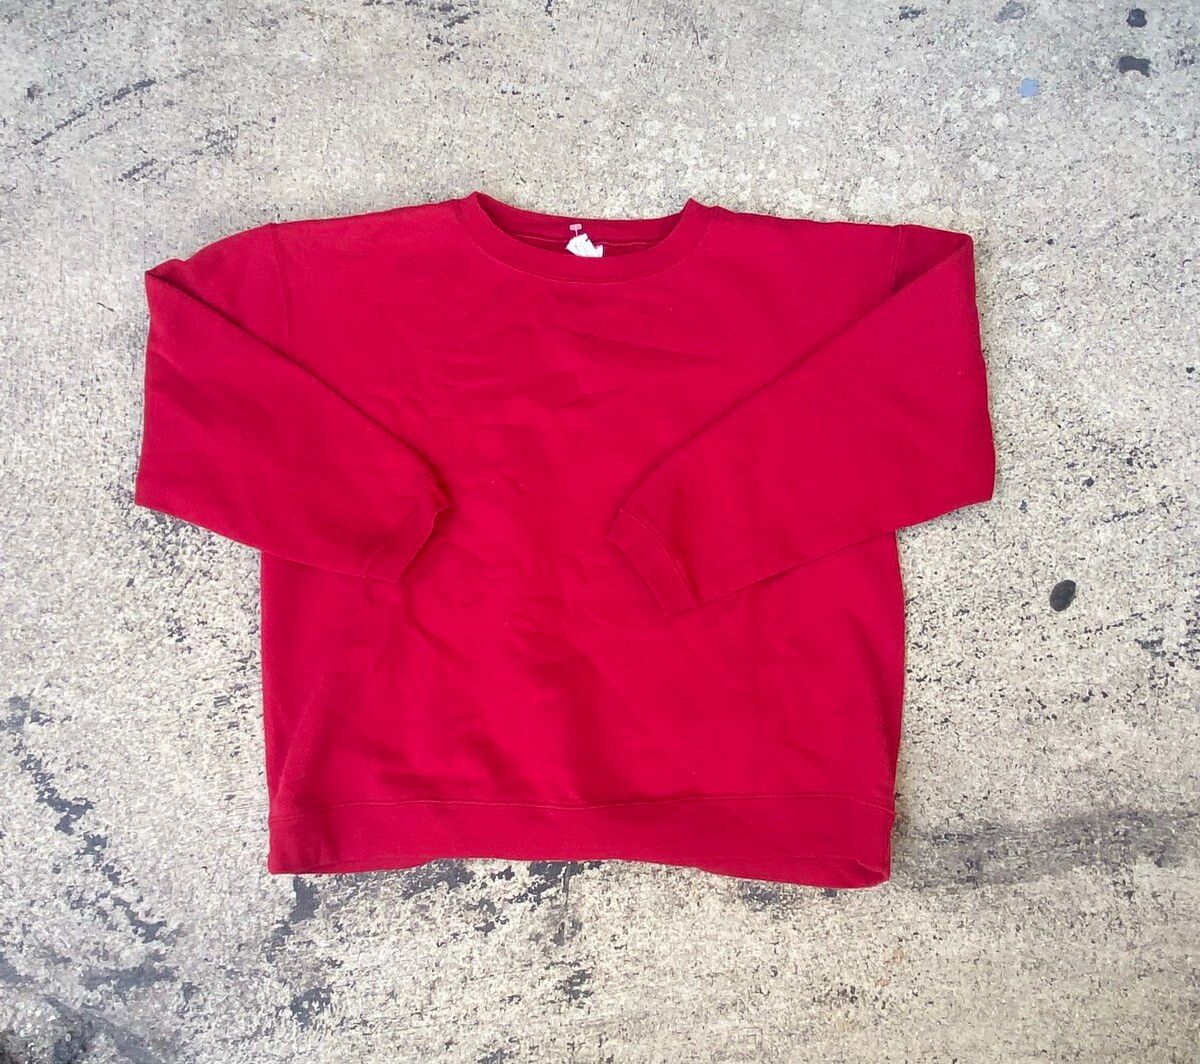 Vintage Hanes Red Blank Sweater Size US S / EU 44-46 / 1 - 1 Preview